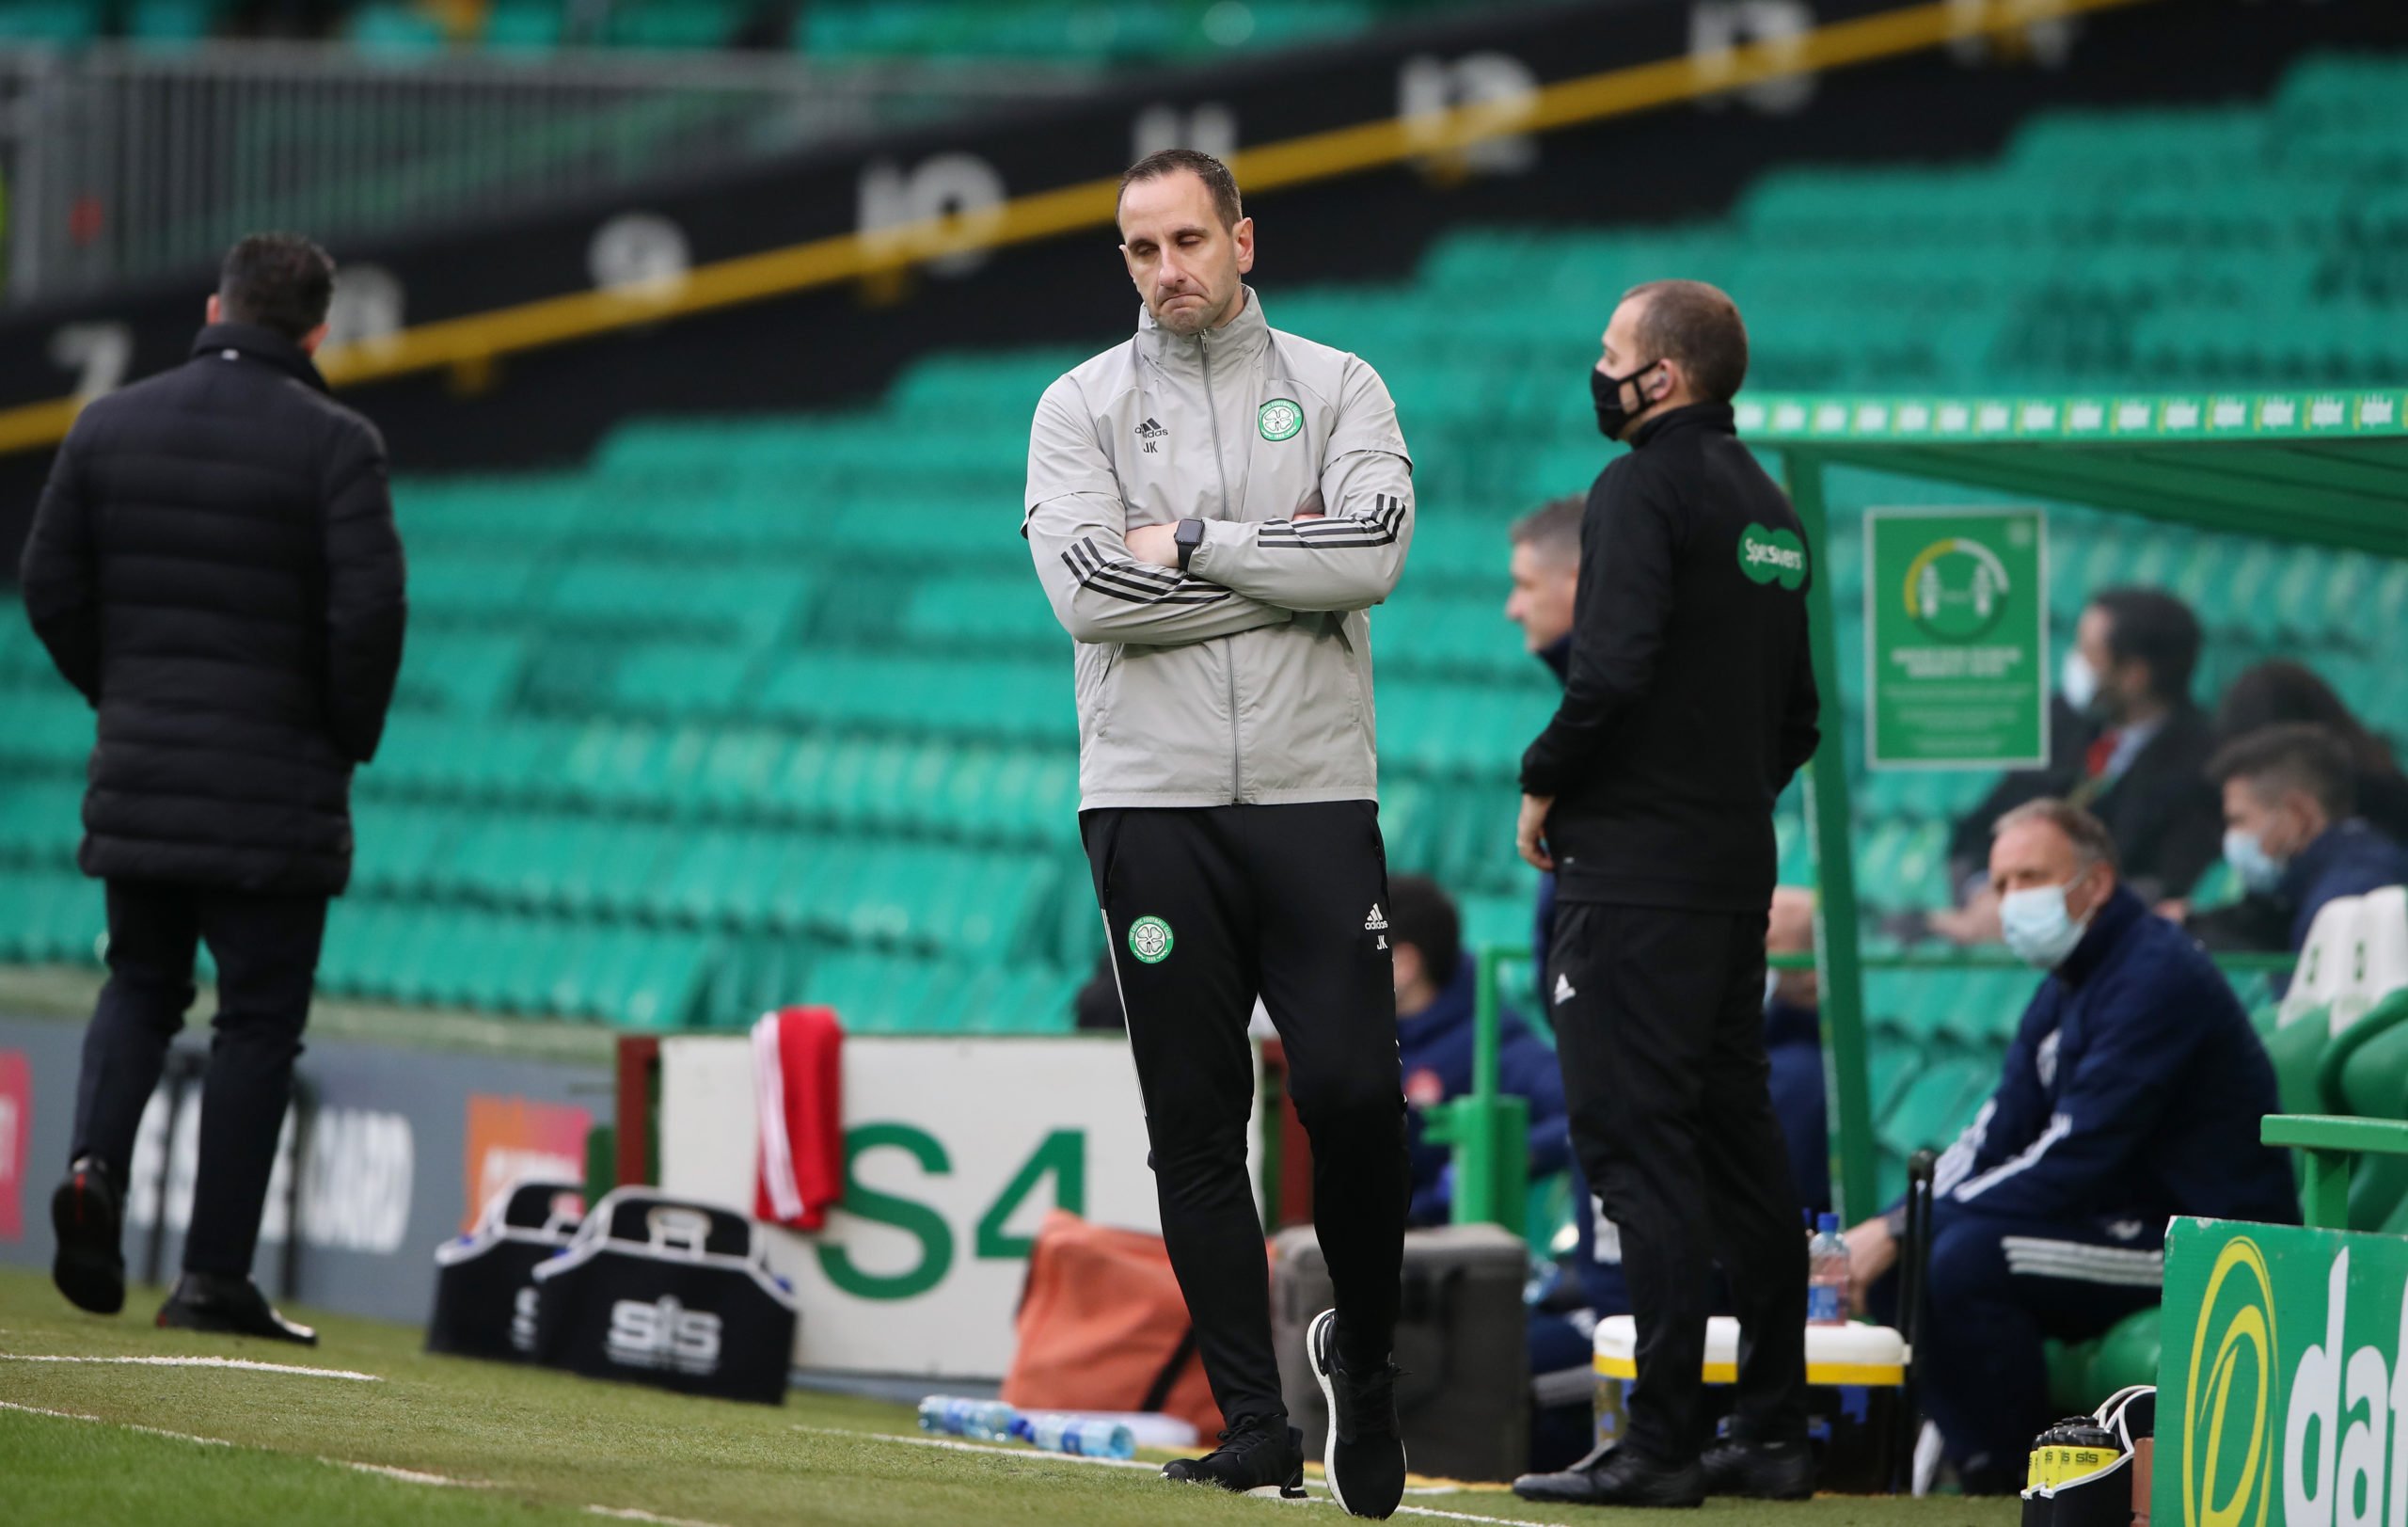 Shoots of improvement: an early look at Celtic under John Kennedy